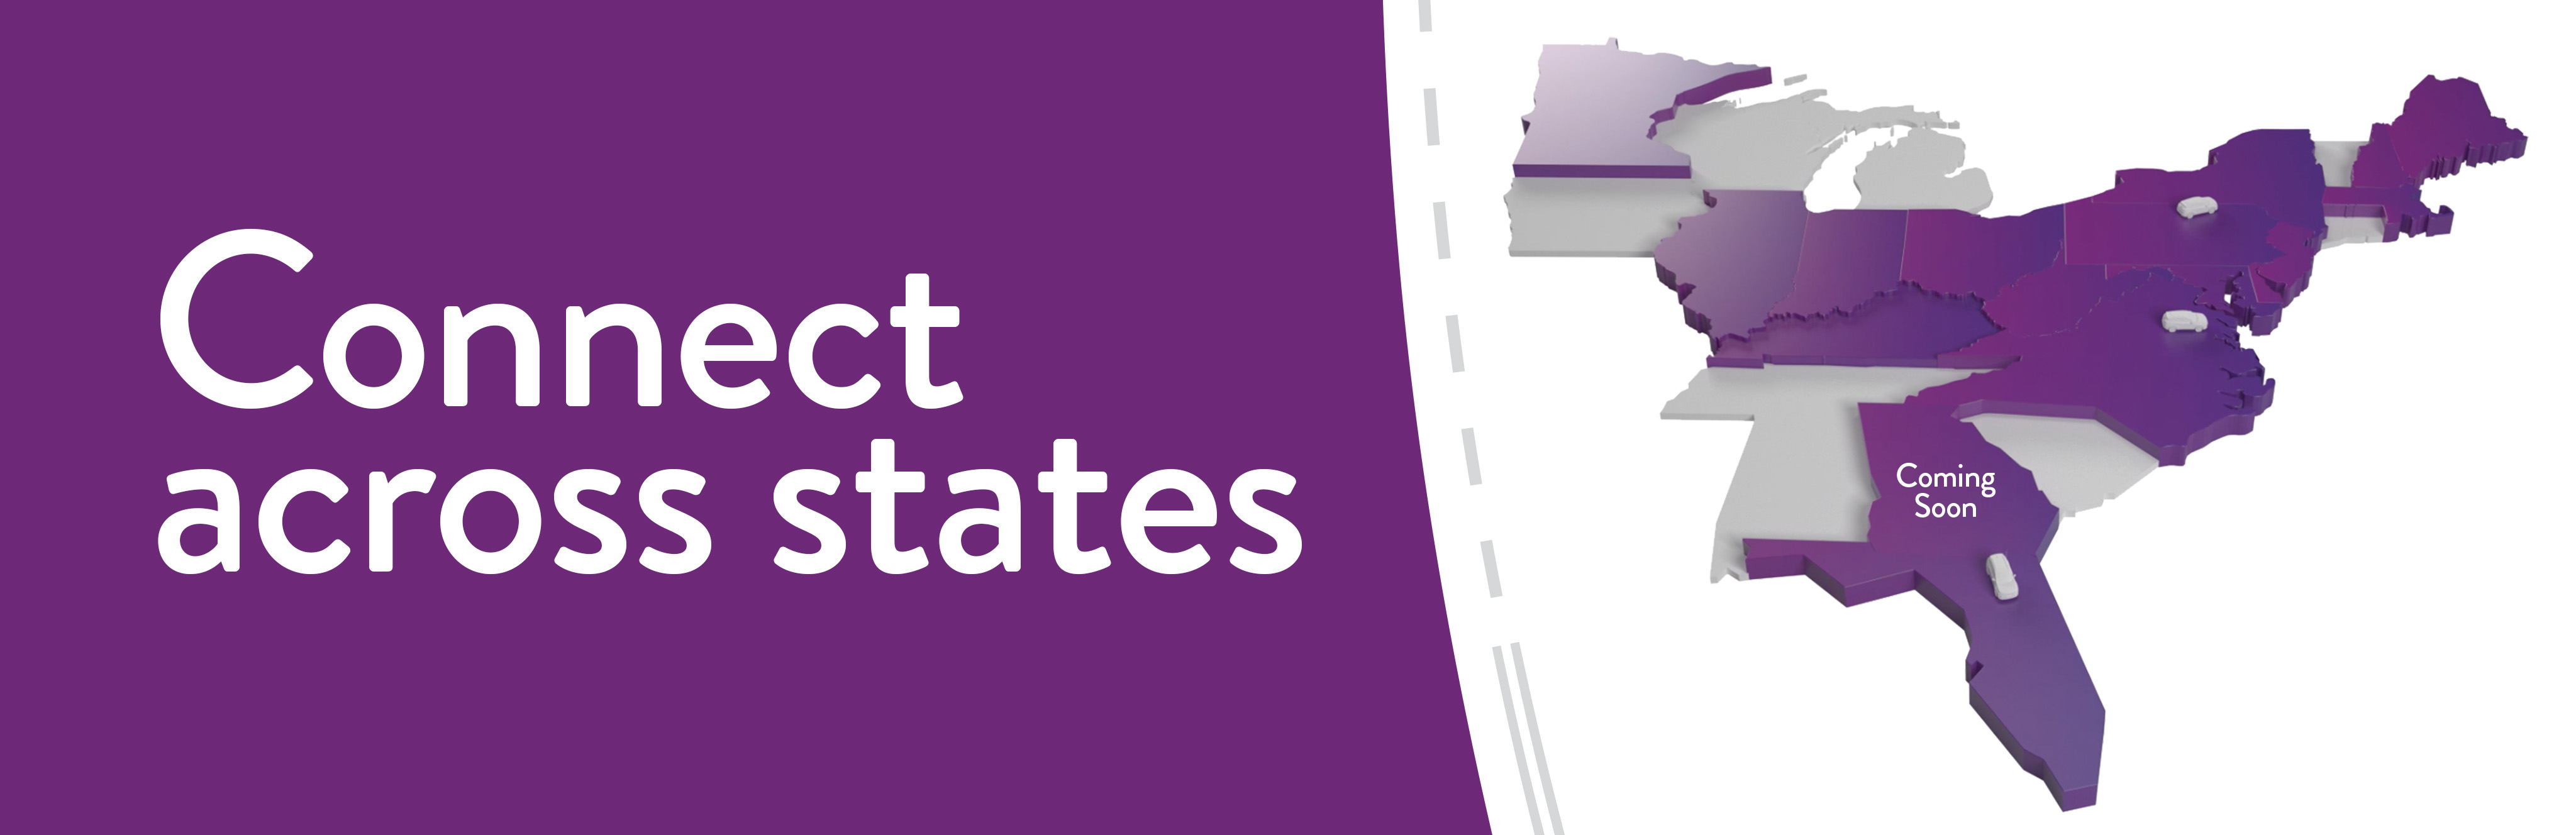 E-ZPass: Connect across states.